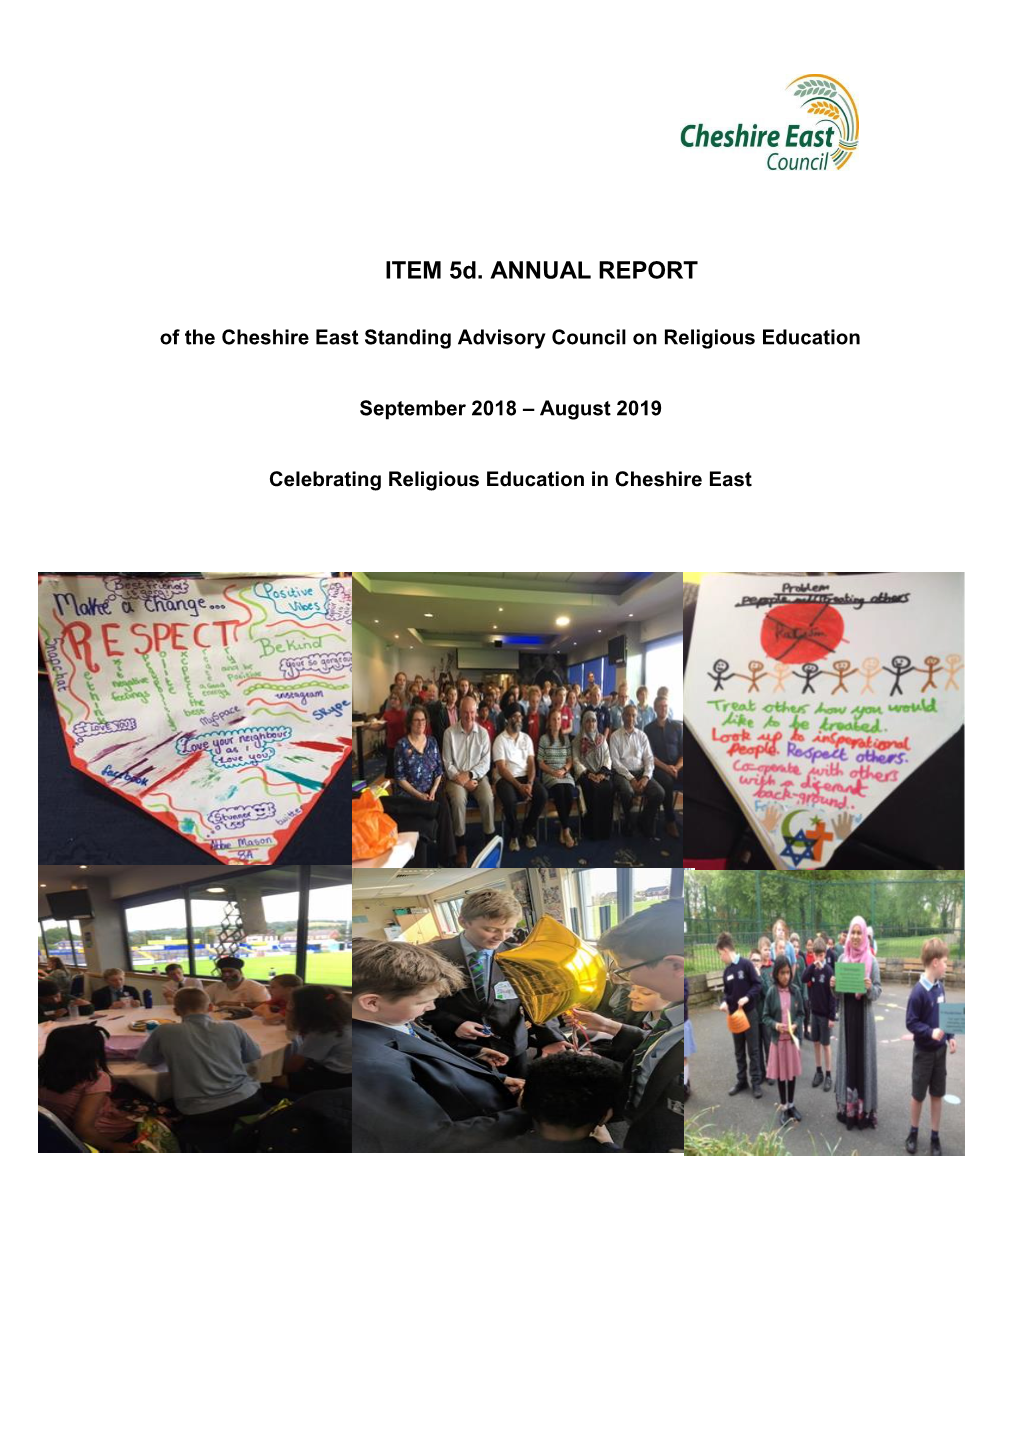 ITEM 5D. ANNUAL REPORT of the Cheshire East Standing Advisory Council on Religious Education